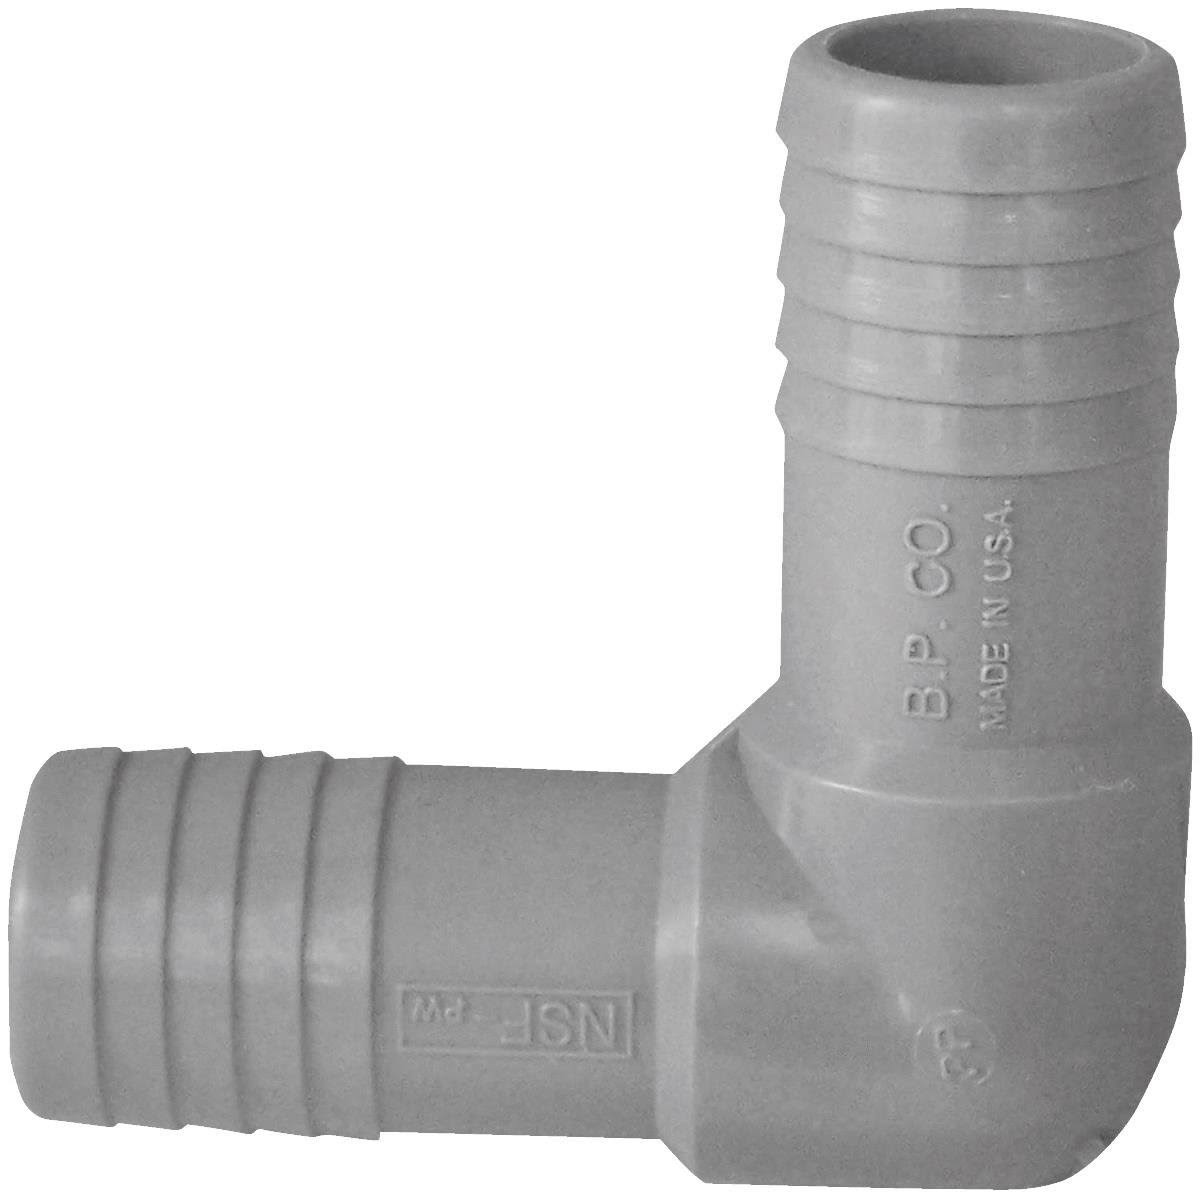 Genova Products 90-Degree Poly Insert Elbow - 1in